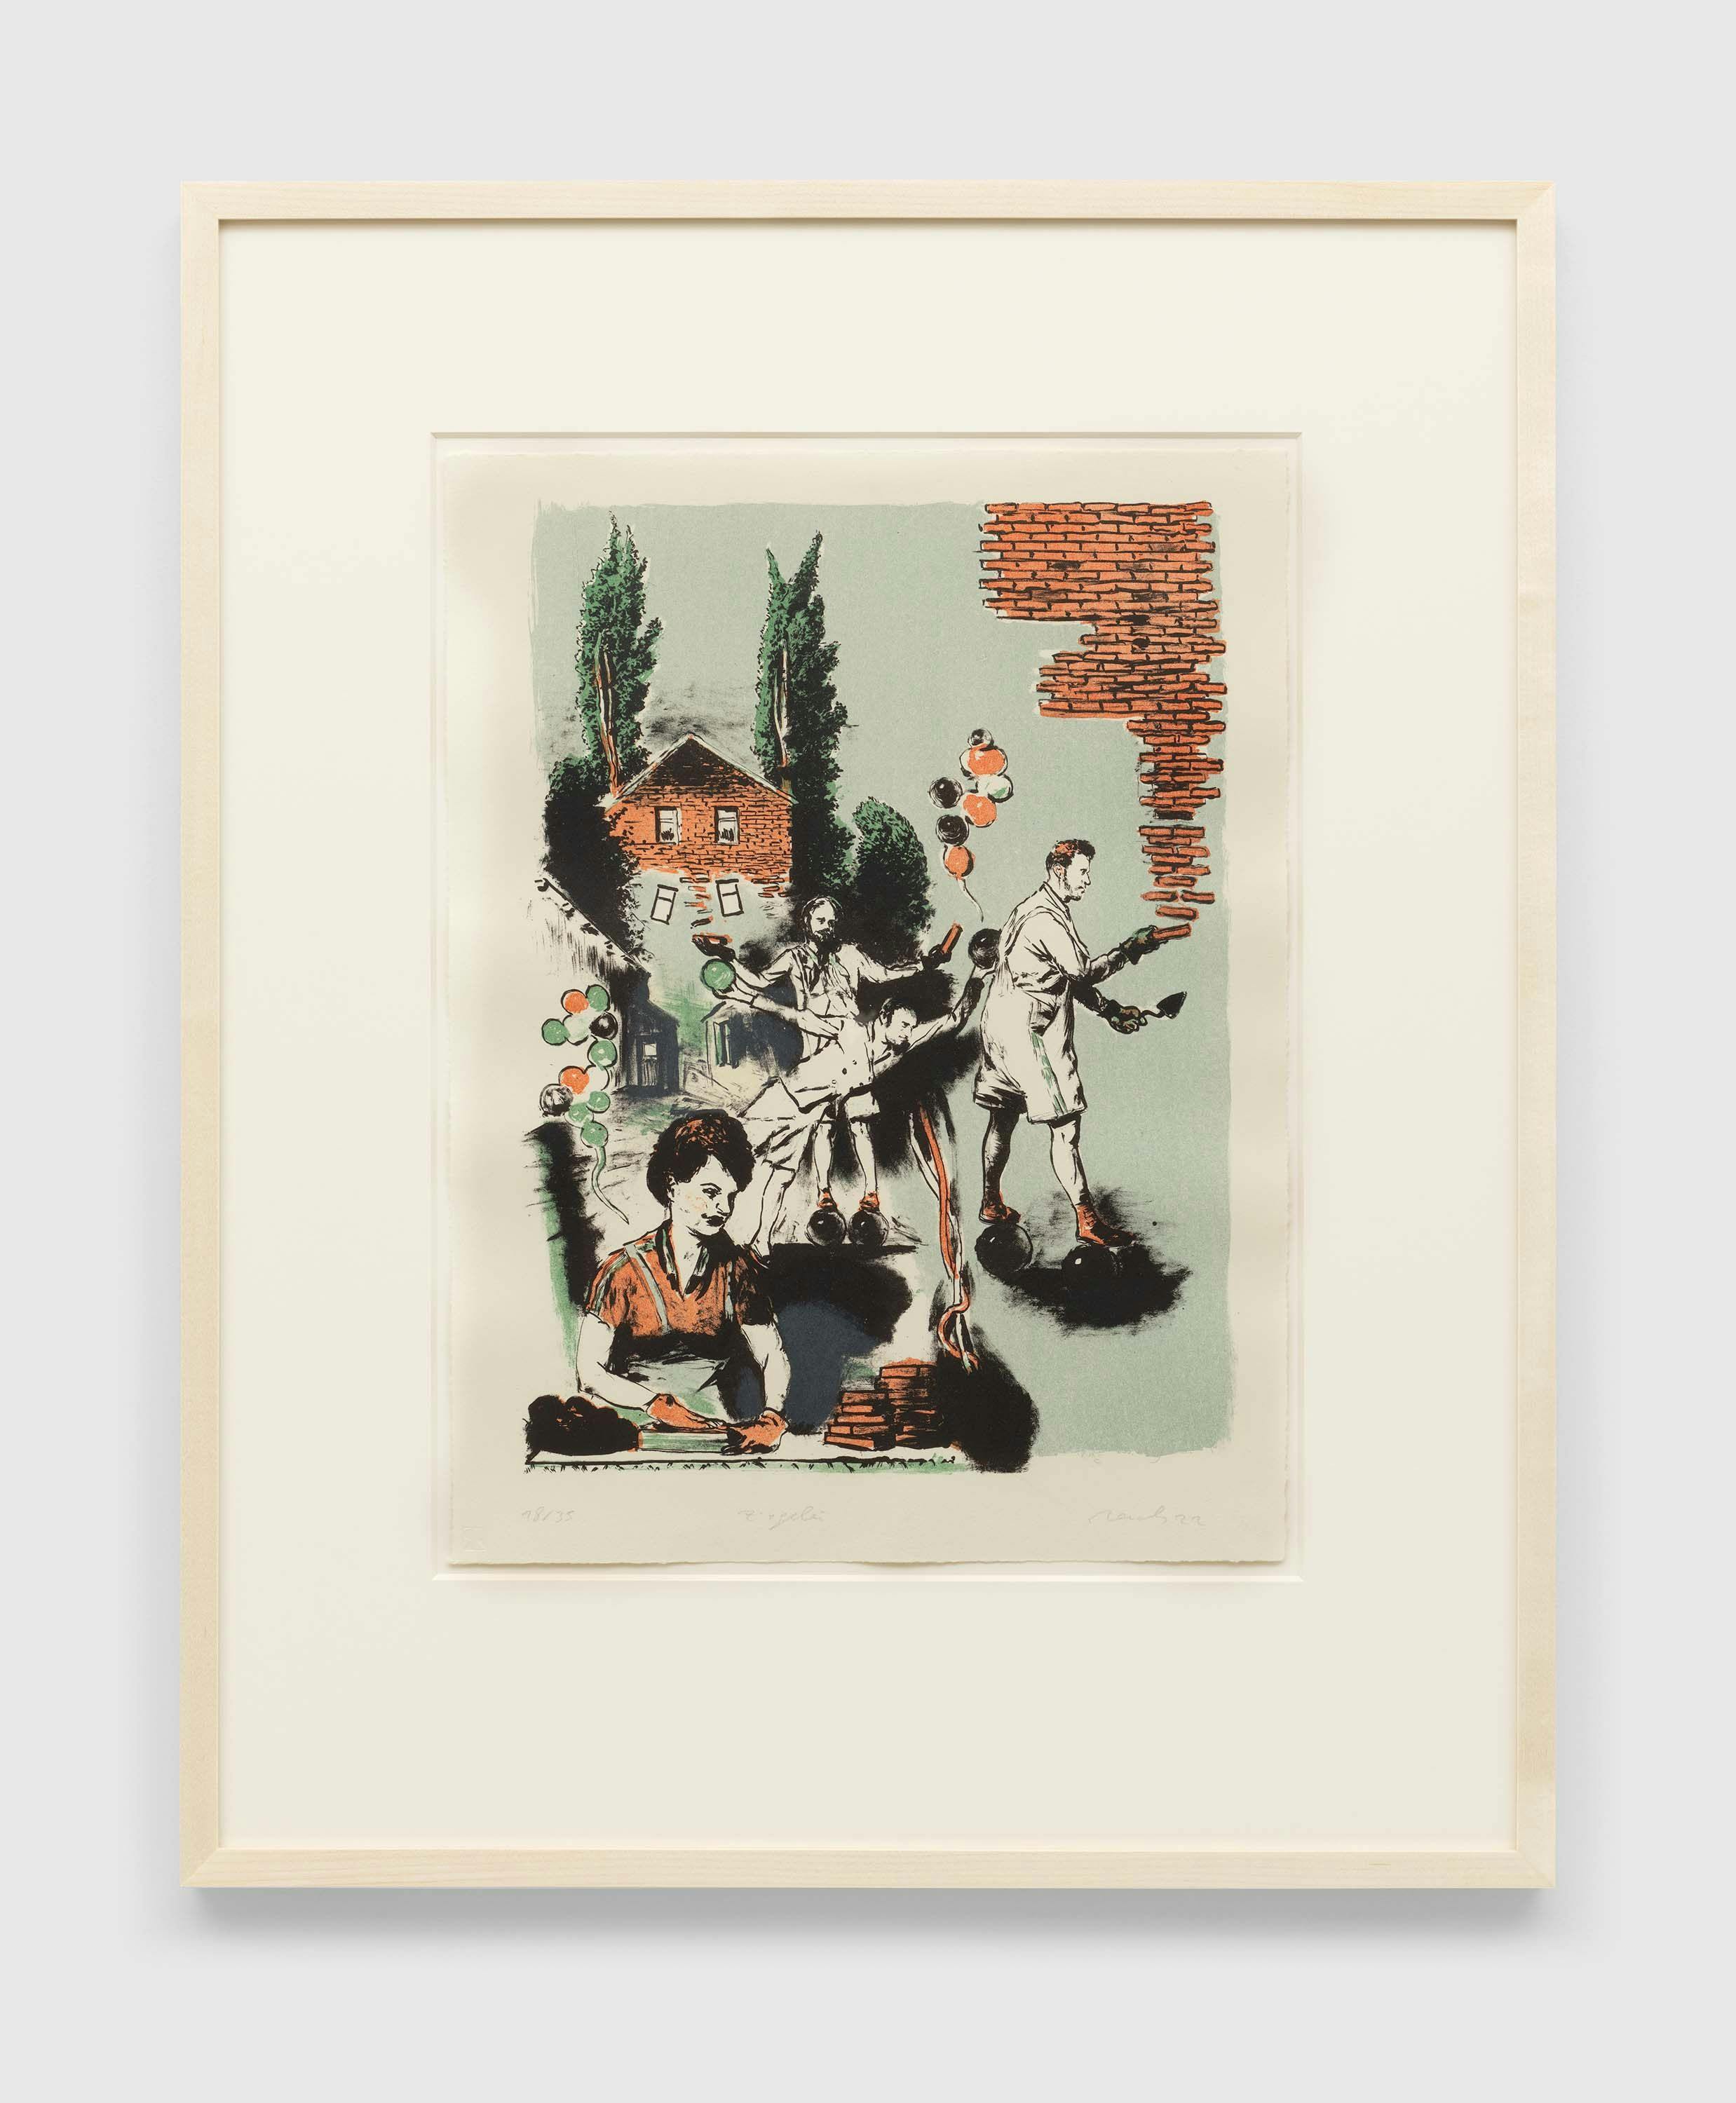 A print by Neo Rauch, titled Ziegelei, dated 2022.